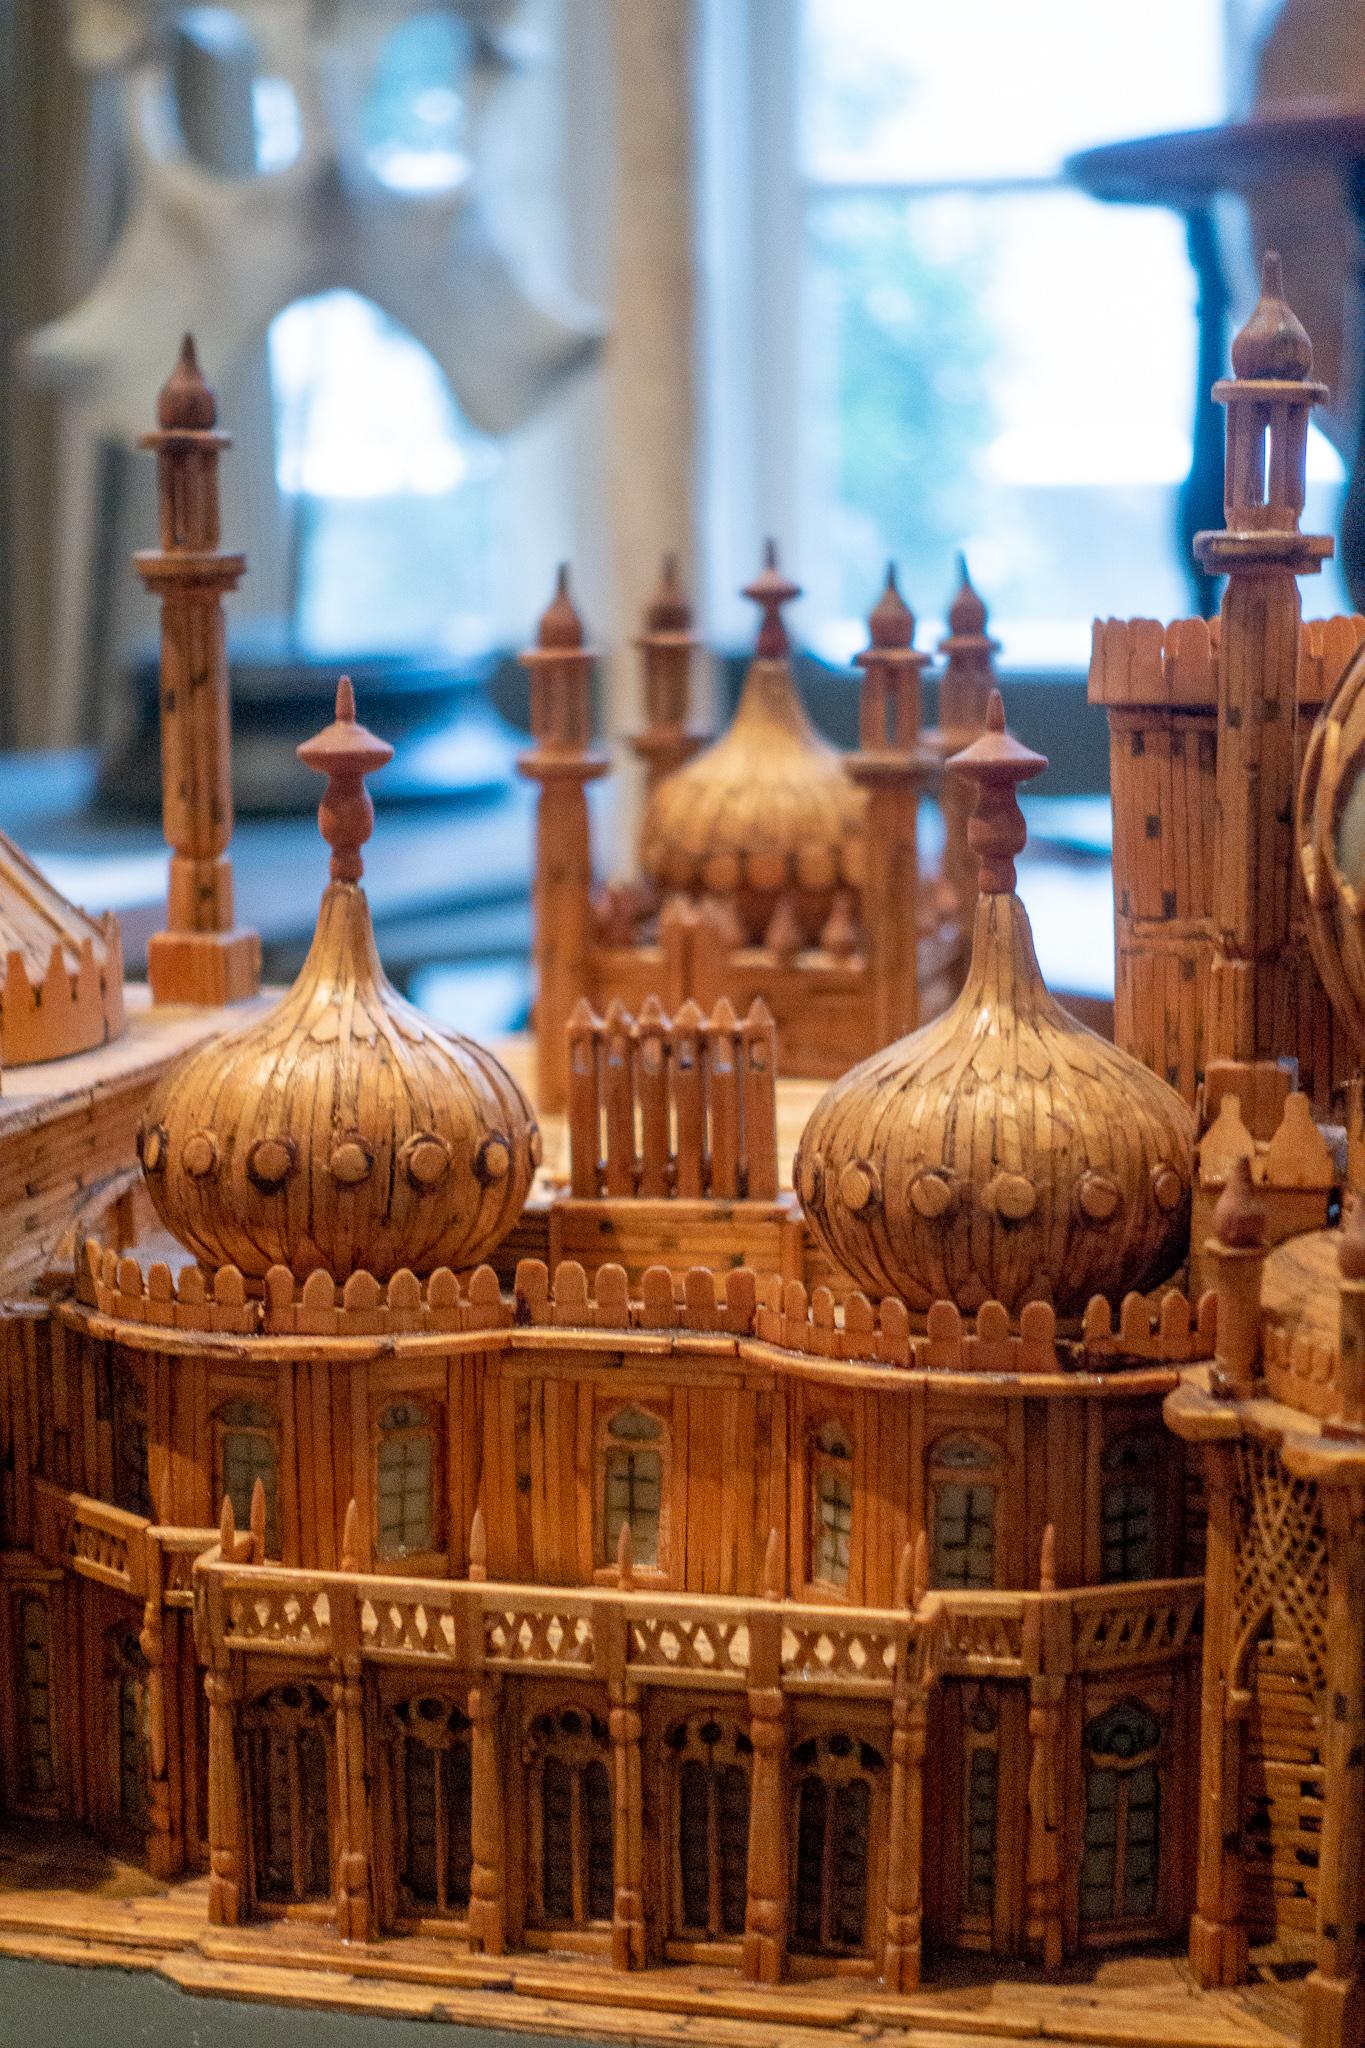 Mid-20th Century Royal Brighton Pavilion Matchstick Architectural Model by Bernard Martell For Sale